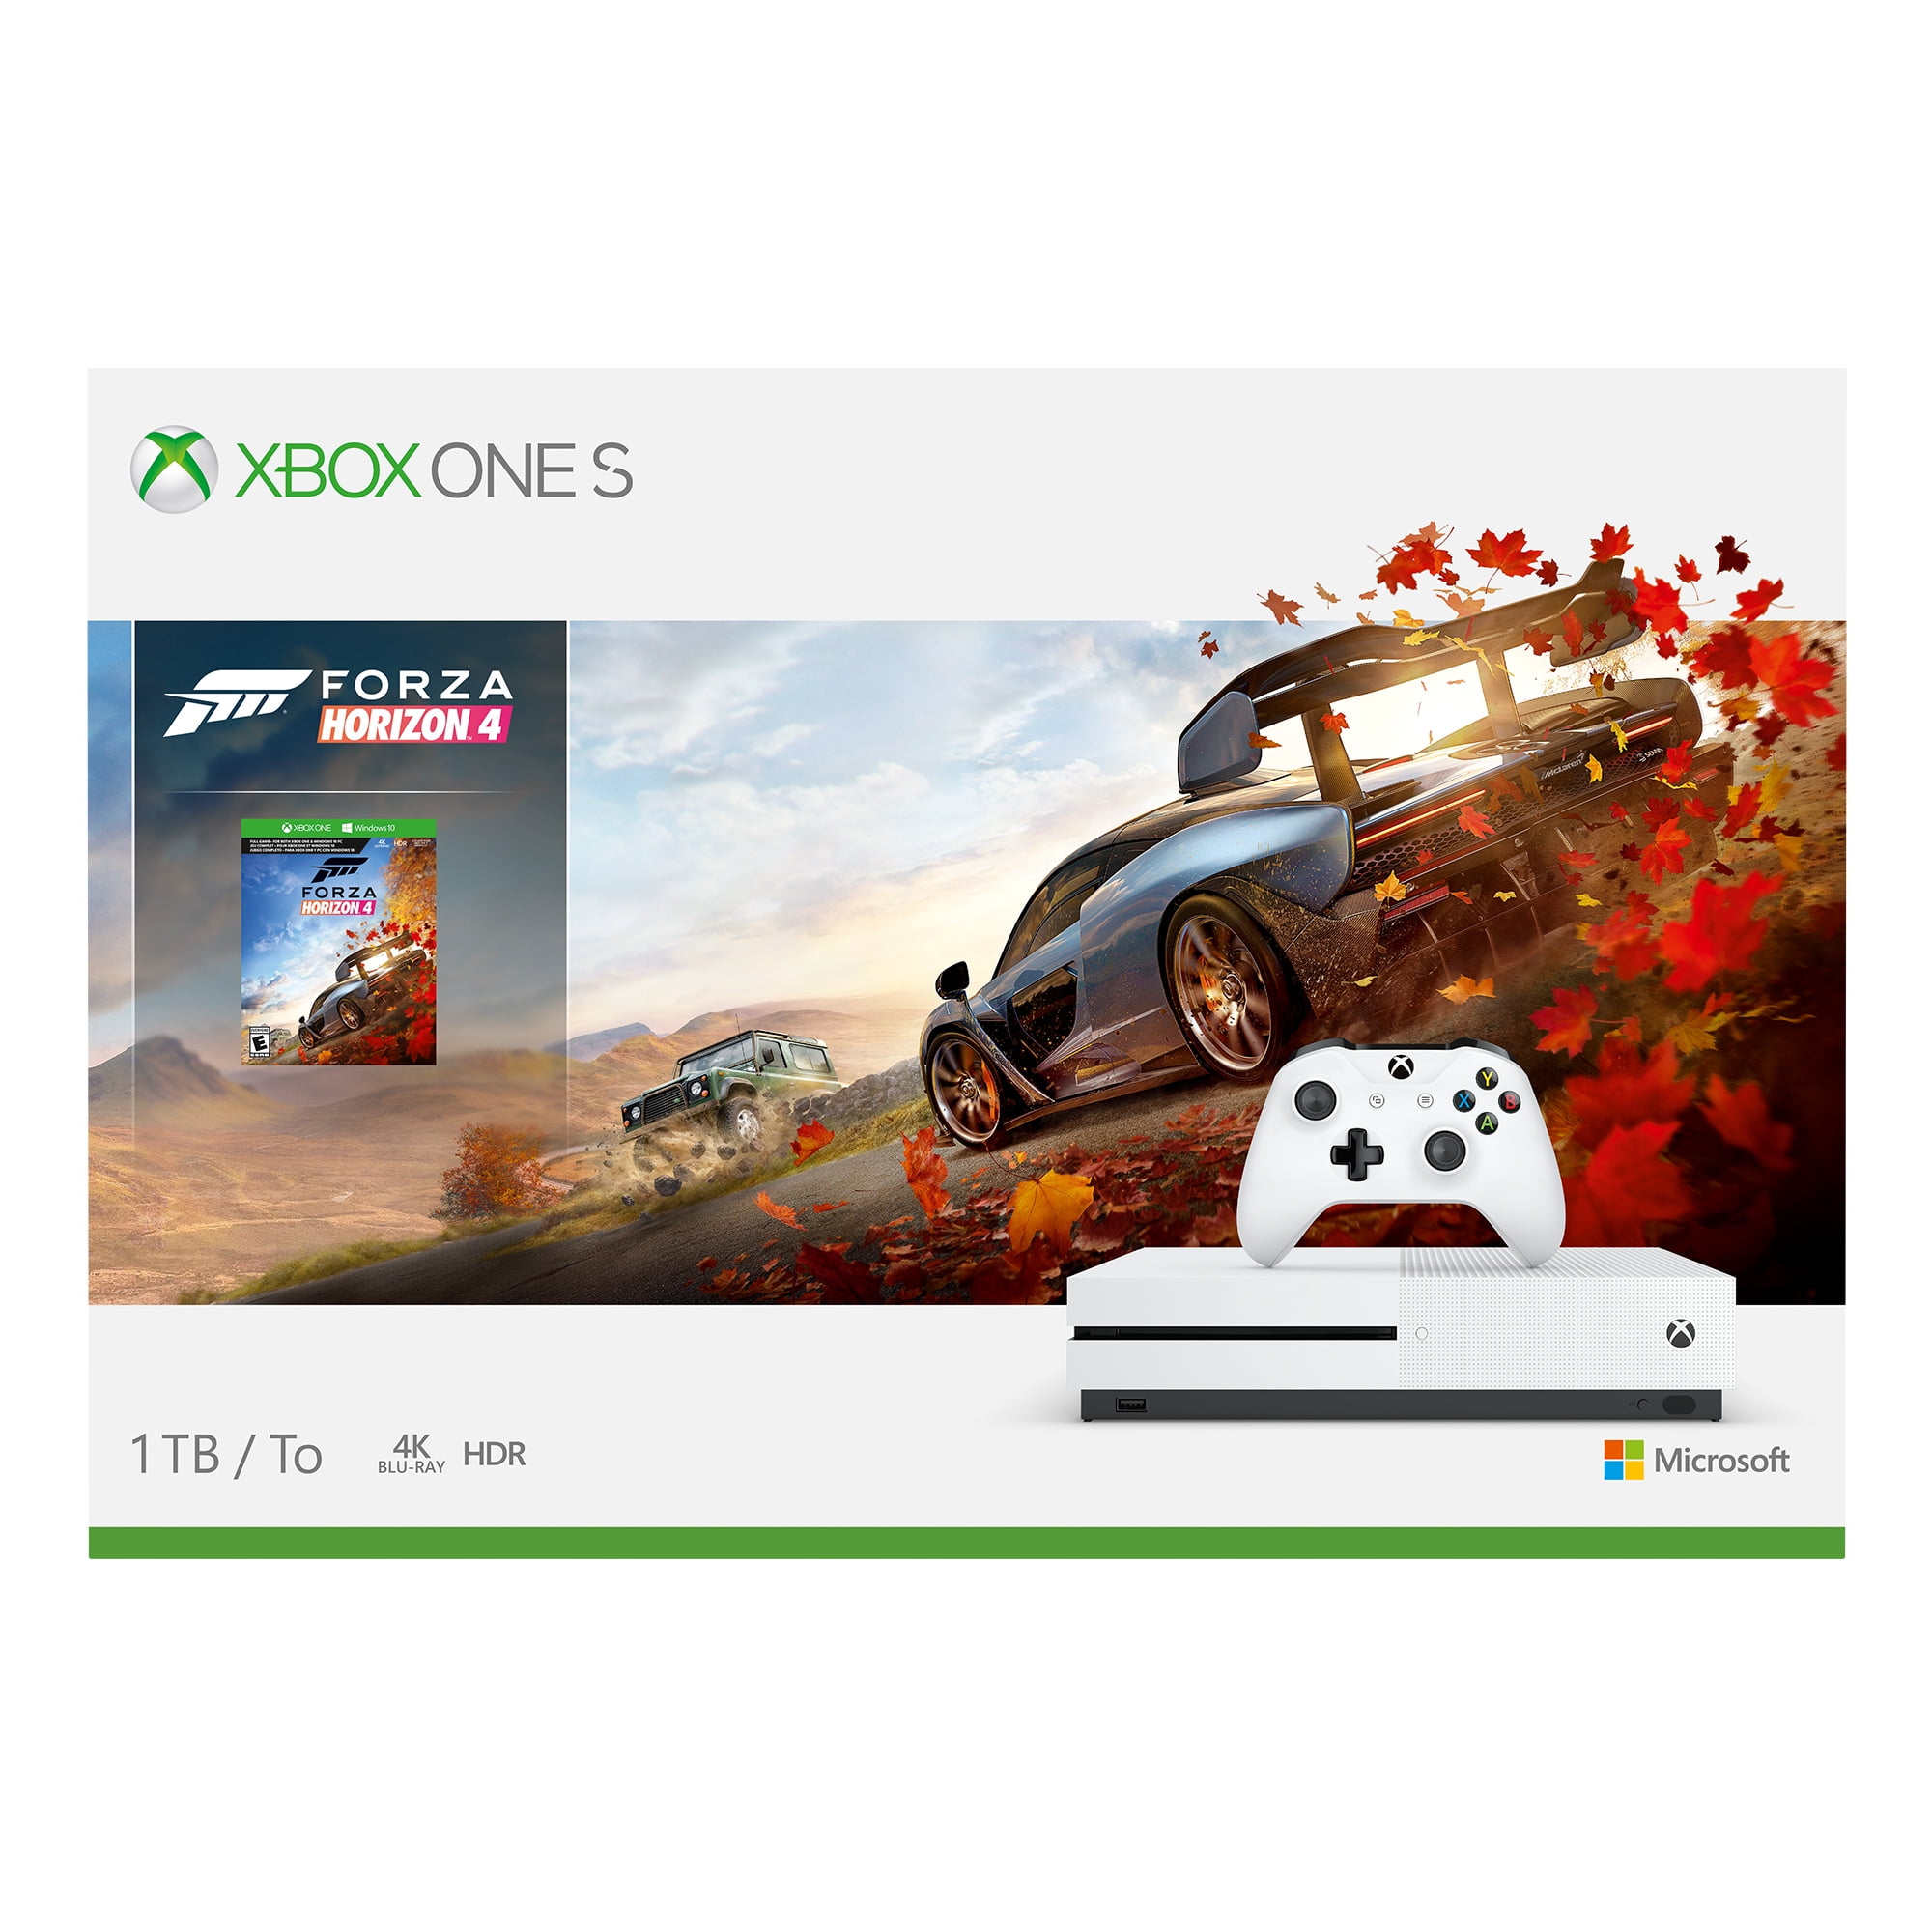 Microsoft is issuing refunds for the Forza Horizon bundle price bug